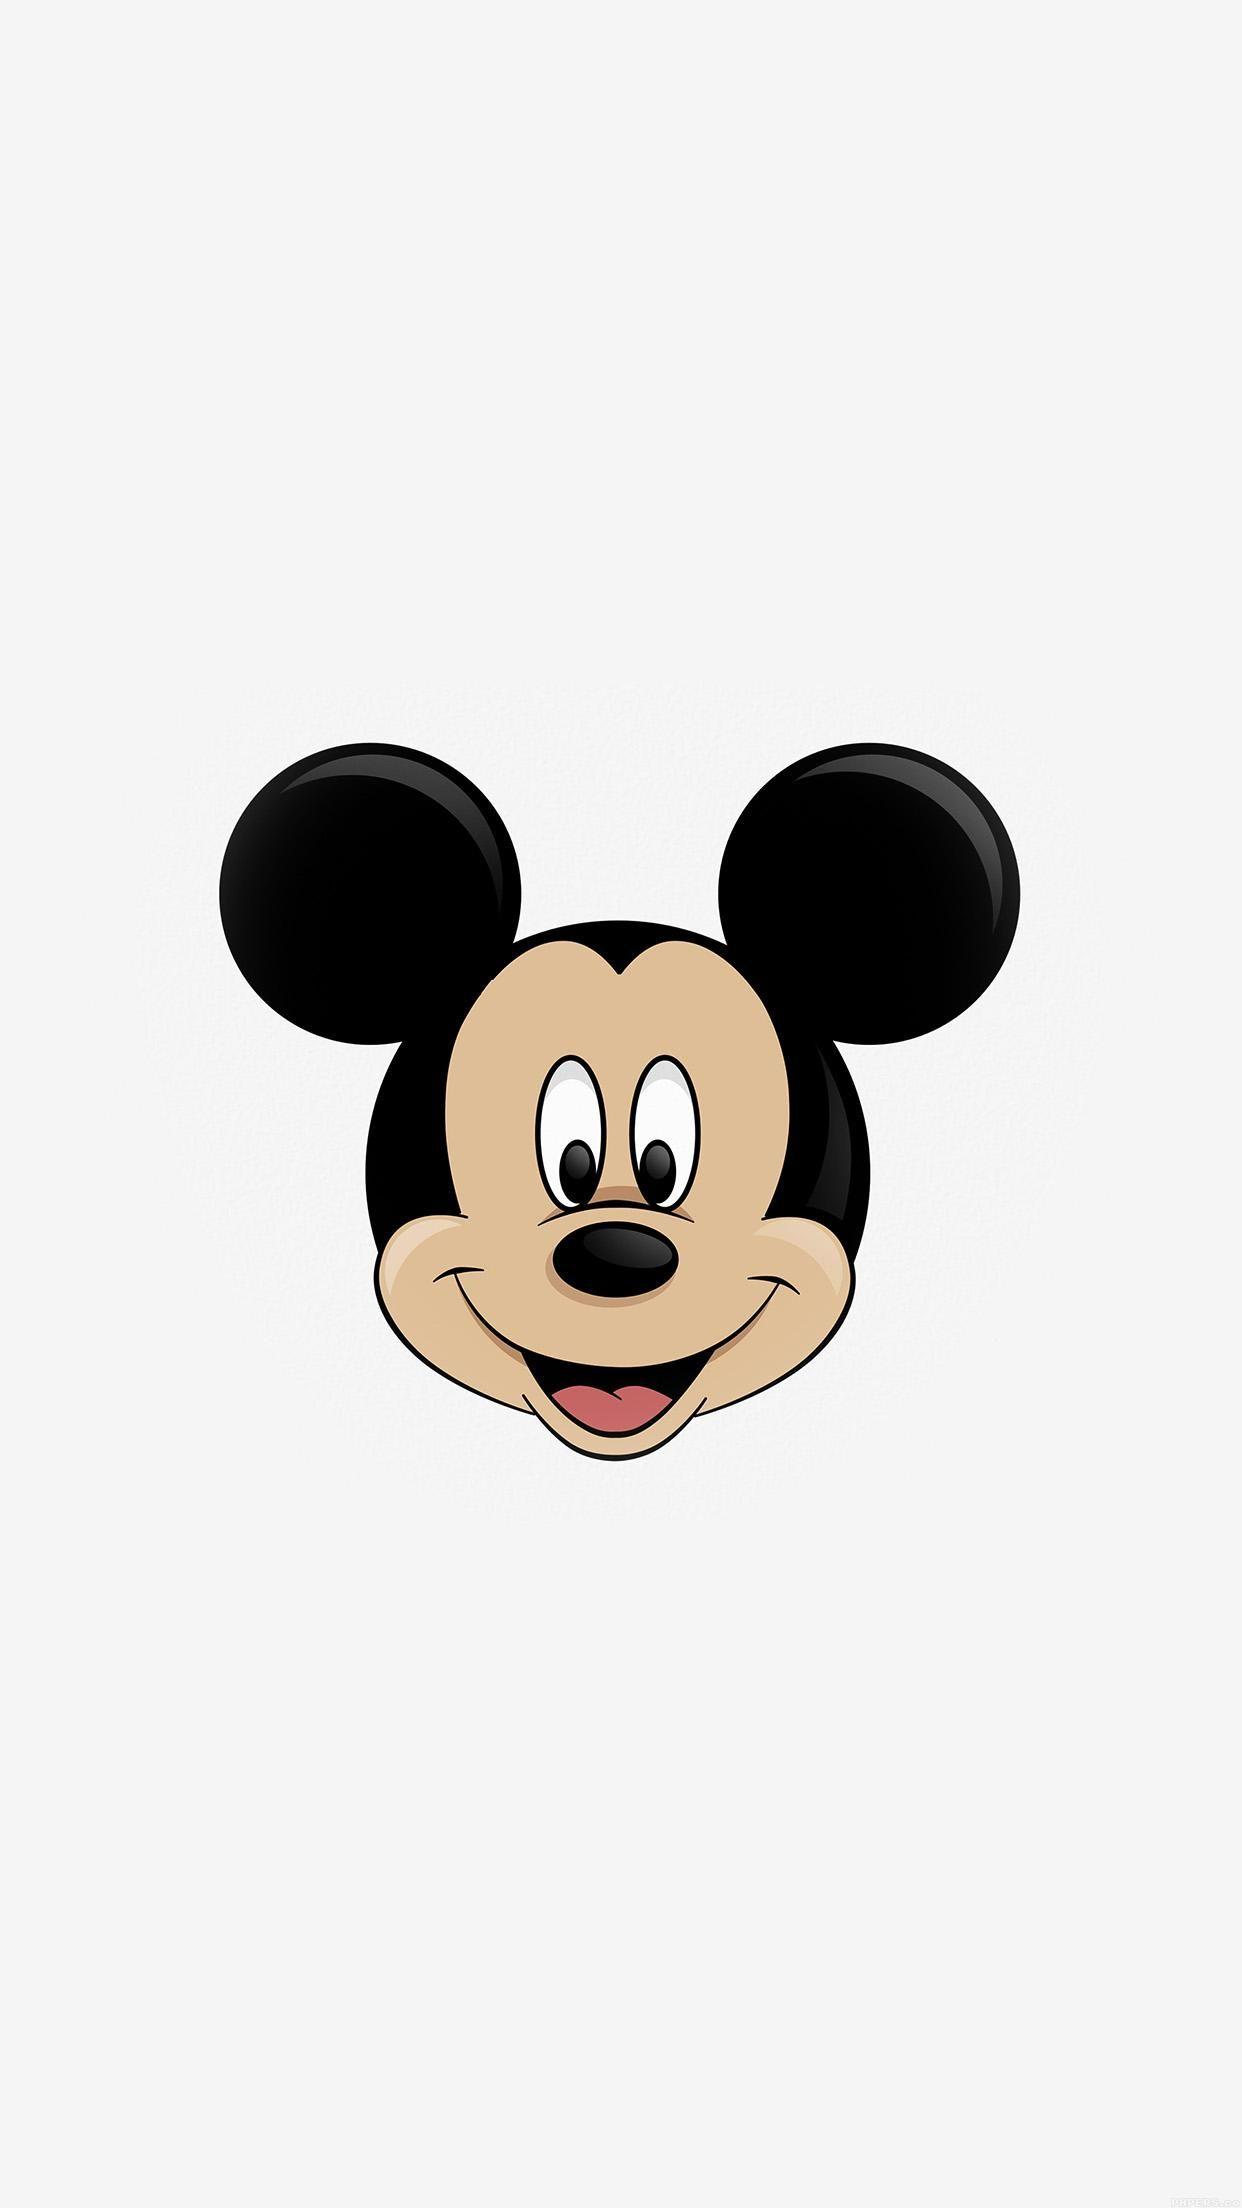 Sorcerer Mickey Mouse iPhone Wallpaper Free Sorcerer Mickey